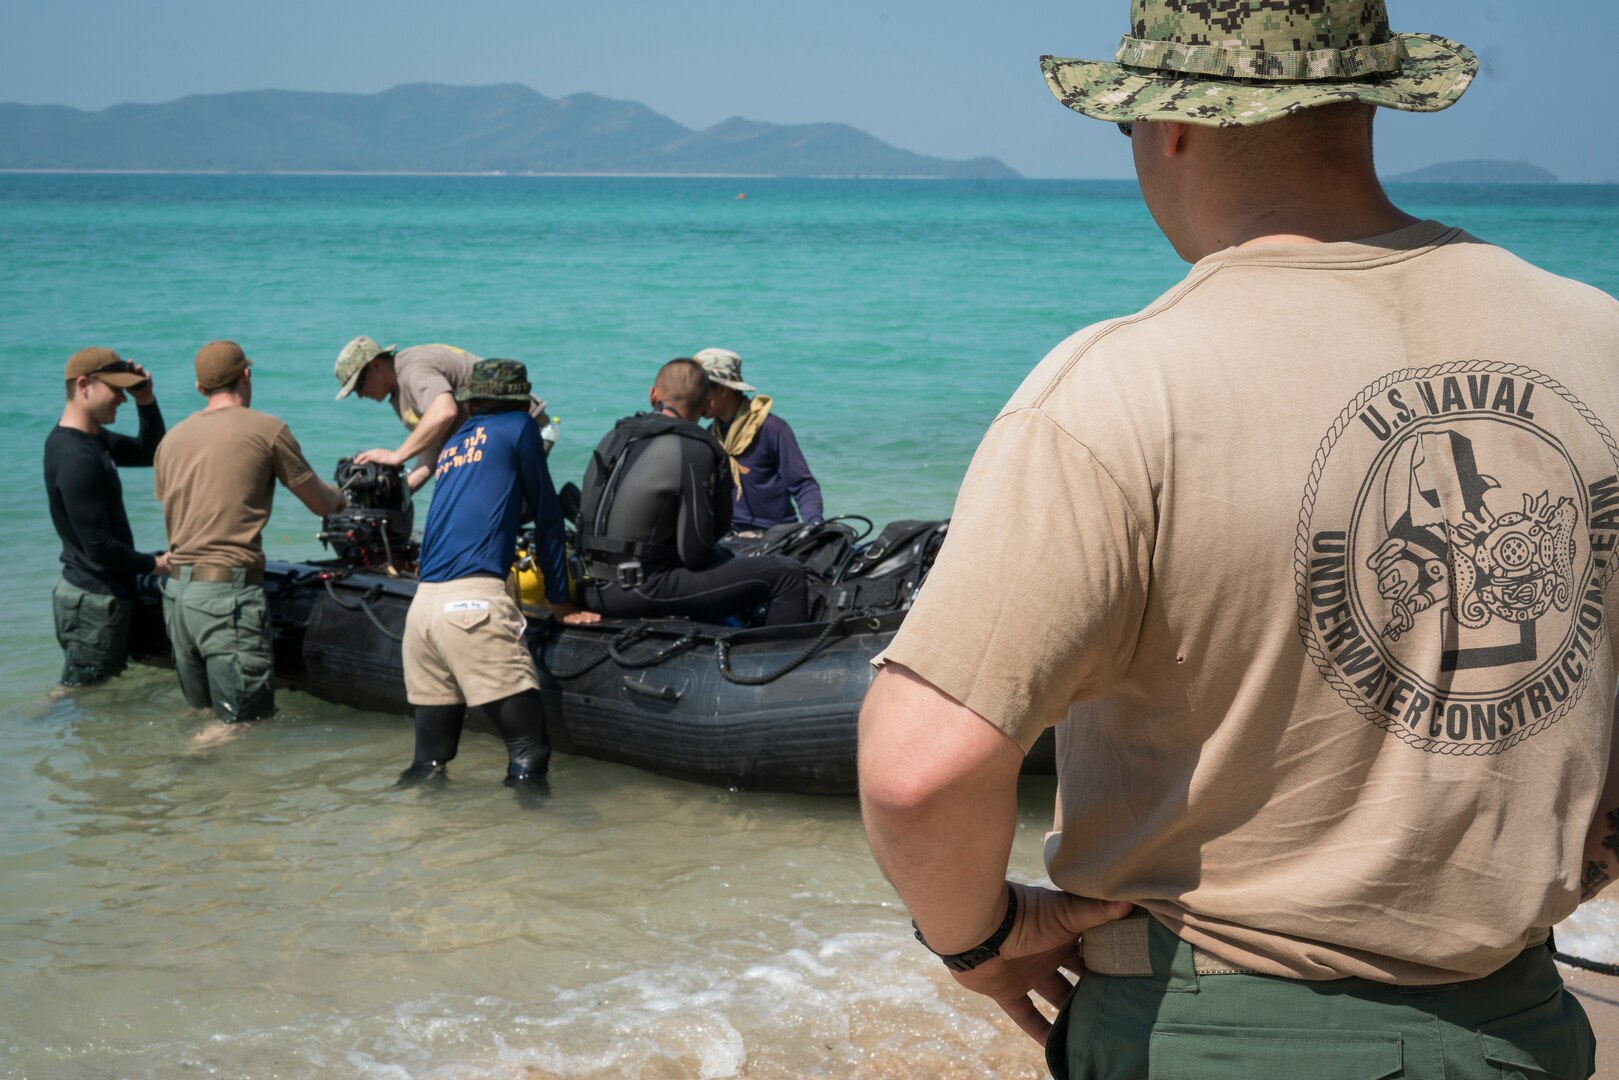 Construction Mechanic 1st Class Matt Ramirez, assigned to Underwater Construction Team (UCT) 2, observes as UCT 2 Sailors prepare to dive with Republic of Korea and Royal Thai Navy in Sattahip, Thailand during Exercise Cobra Gold Feb. 14, 2018. The 37th iteration of Cobra Gold is an important element of the United States and participating nations seeking to maintain readiness, develop capabilities, and enhance security and stability.